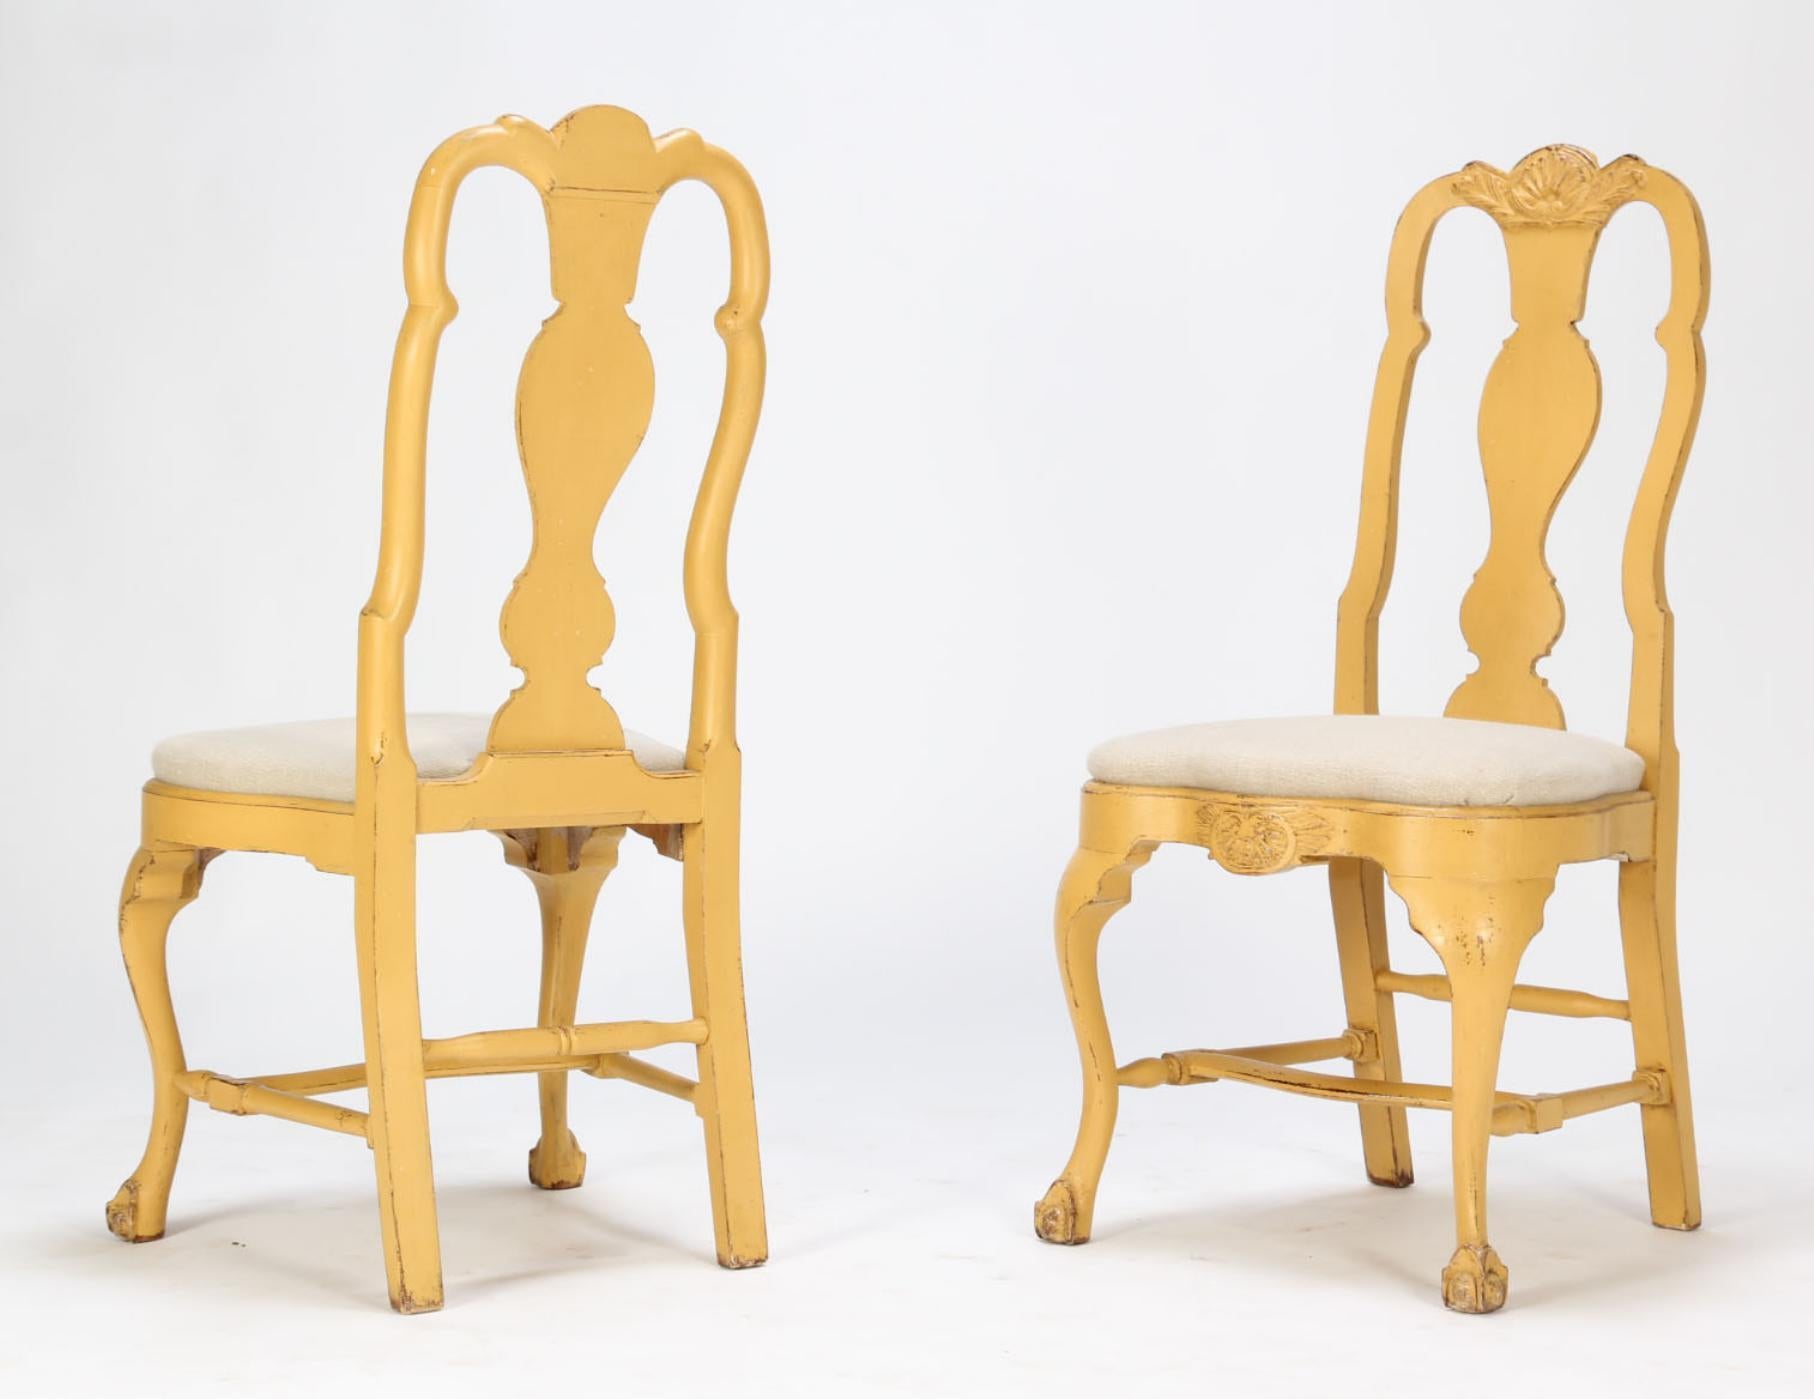 Beautiful set of 10 dining room chairs, Swedish, turn of 20th C, popular Queen Anne style in rococo form, in a beige/yellow paint, sturdy but elegant, seats in perfect condition in off-white fabric.